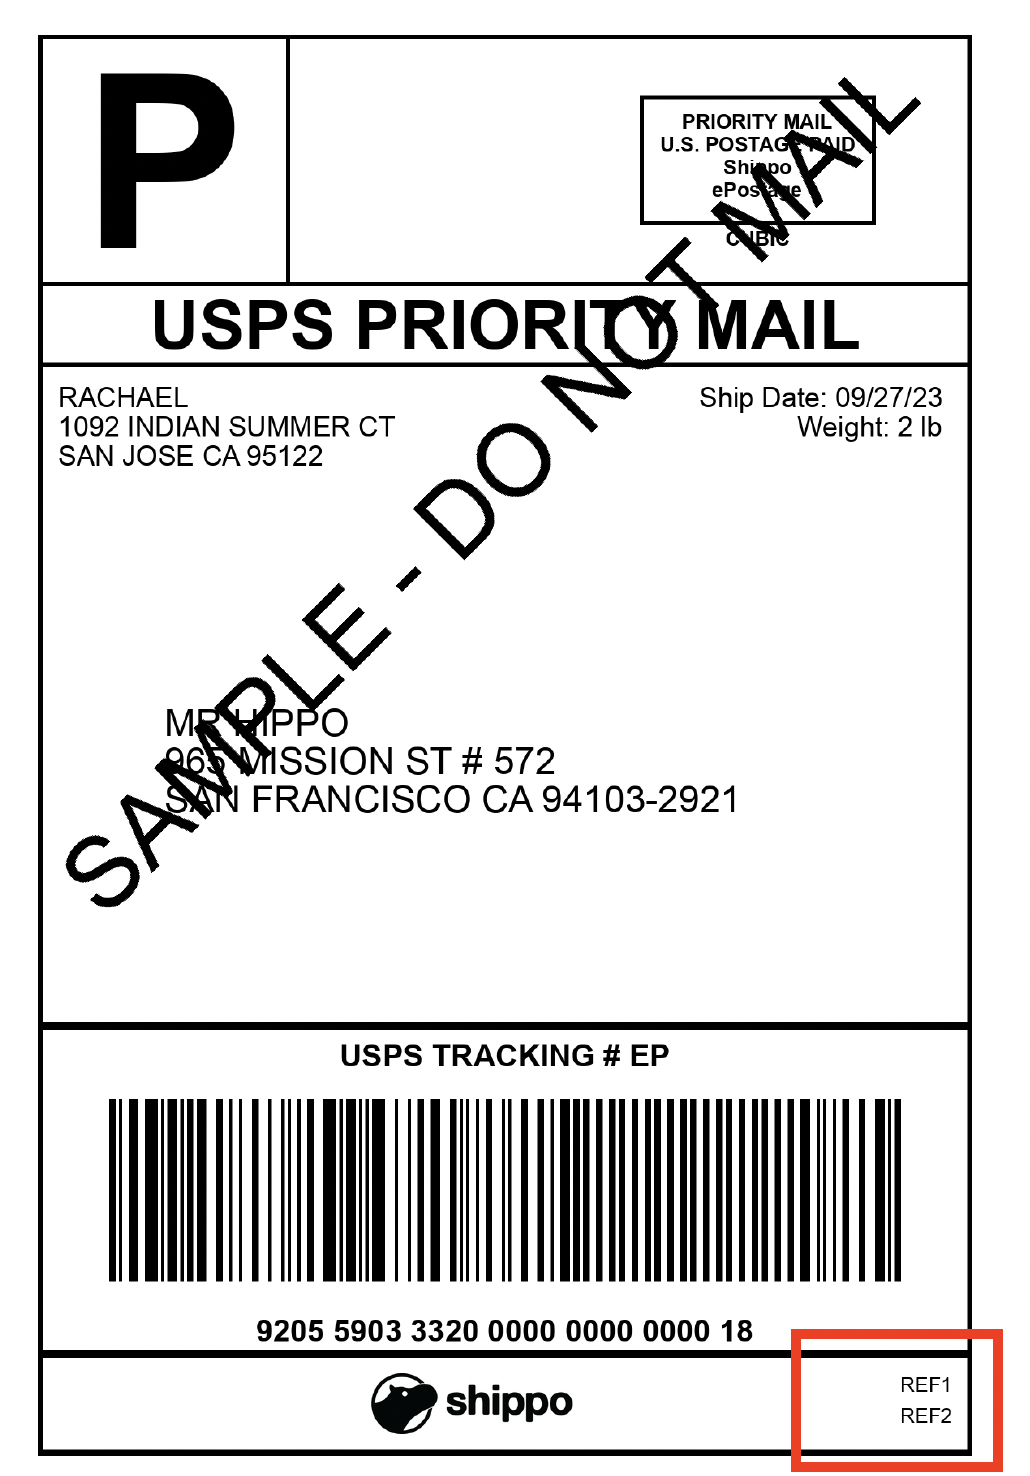 USPS sample label with the location of ref1 and ref2 highlighted